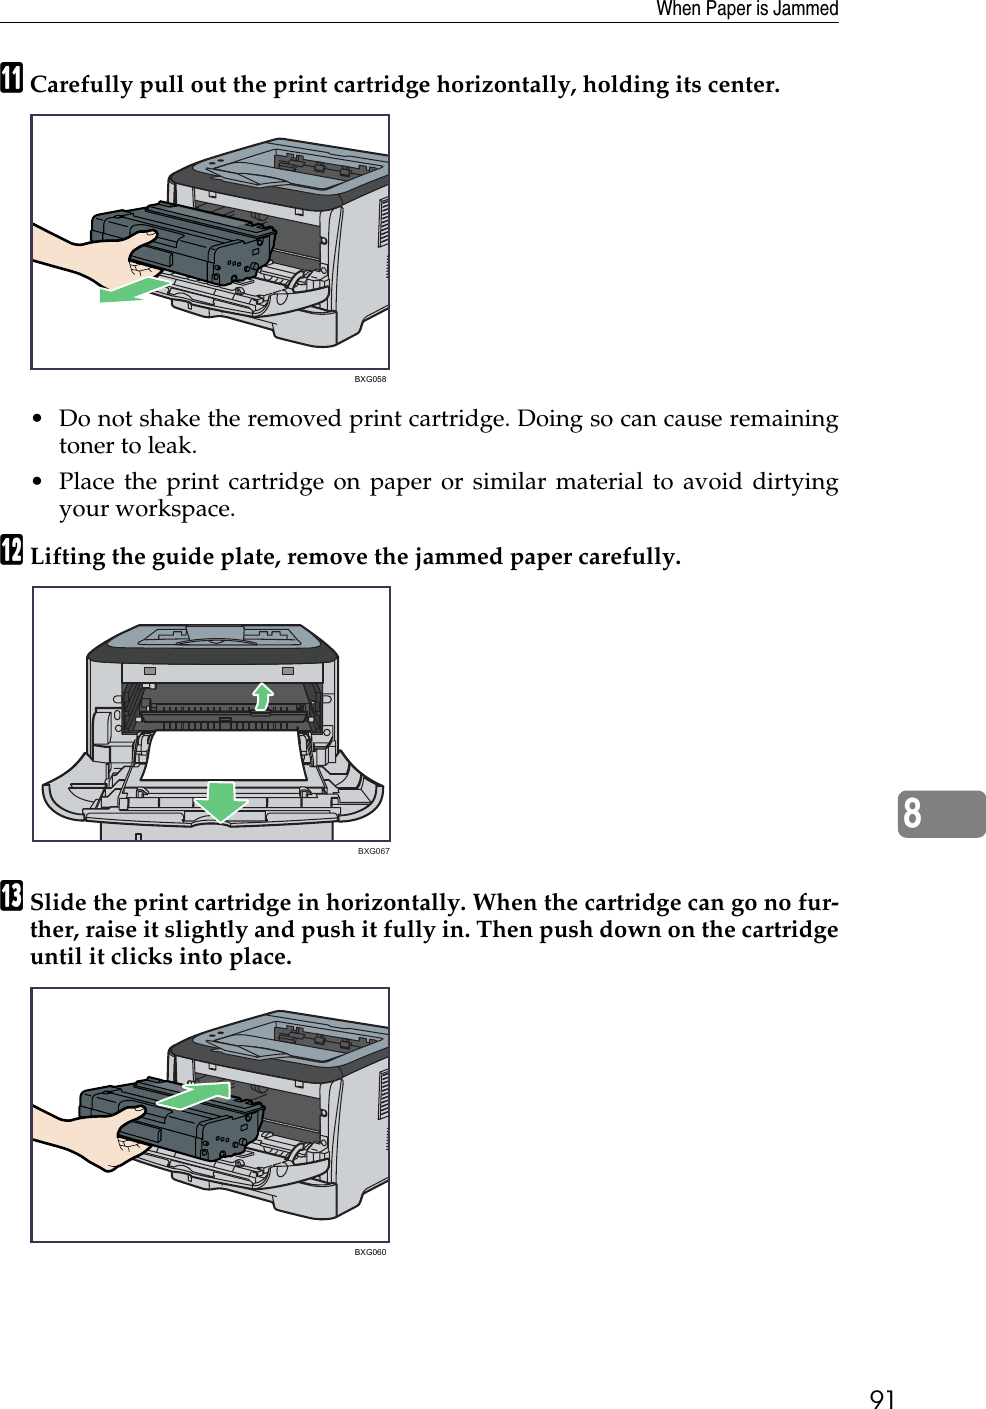 When Paper is Jammed918KCarefully pull out the print cartridge horizontally, holding its center.• Do not shake the removed print cartridge. Doing so can cause remainingtoner to leak.• Place the print cartridge on paper or similar material to avoid dirtyingyour workspace.LLifting the guide plate, remove the jammed paper carefully.MSlide the print cartridge in horizontally. When the cartridge can go no fur-ther, raise it slightly and push it fully in. Then push down on the cartridgeuntil it clicks into place.BXG058 BXG067BXG060